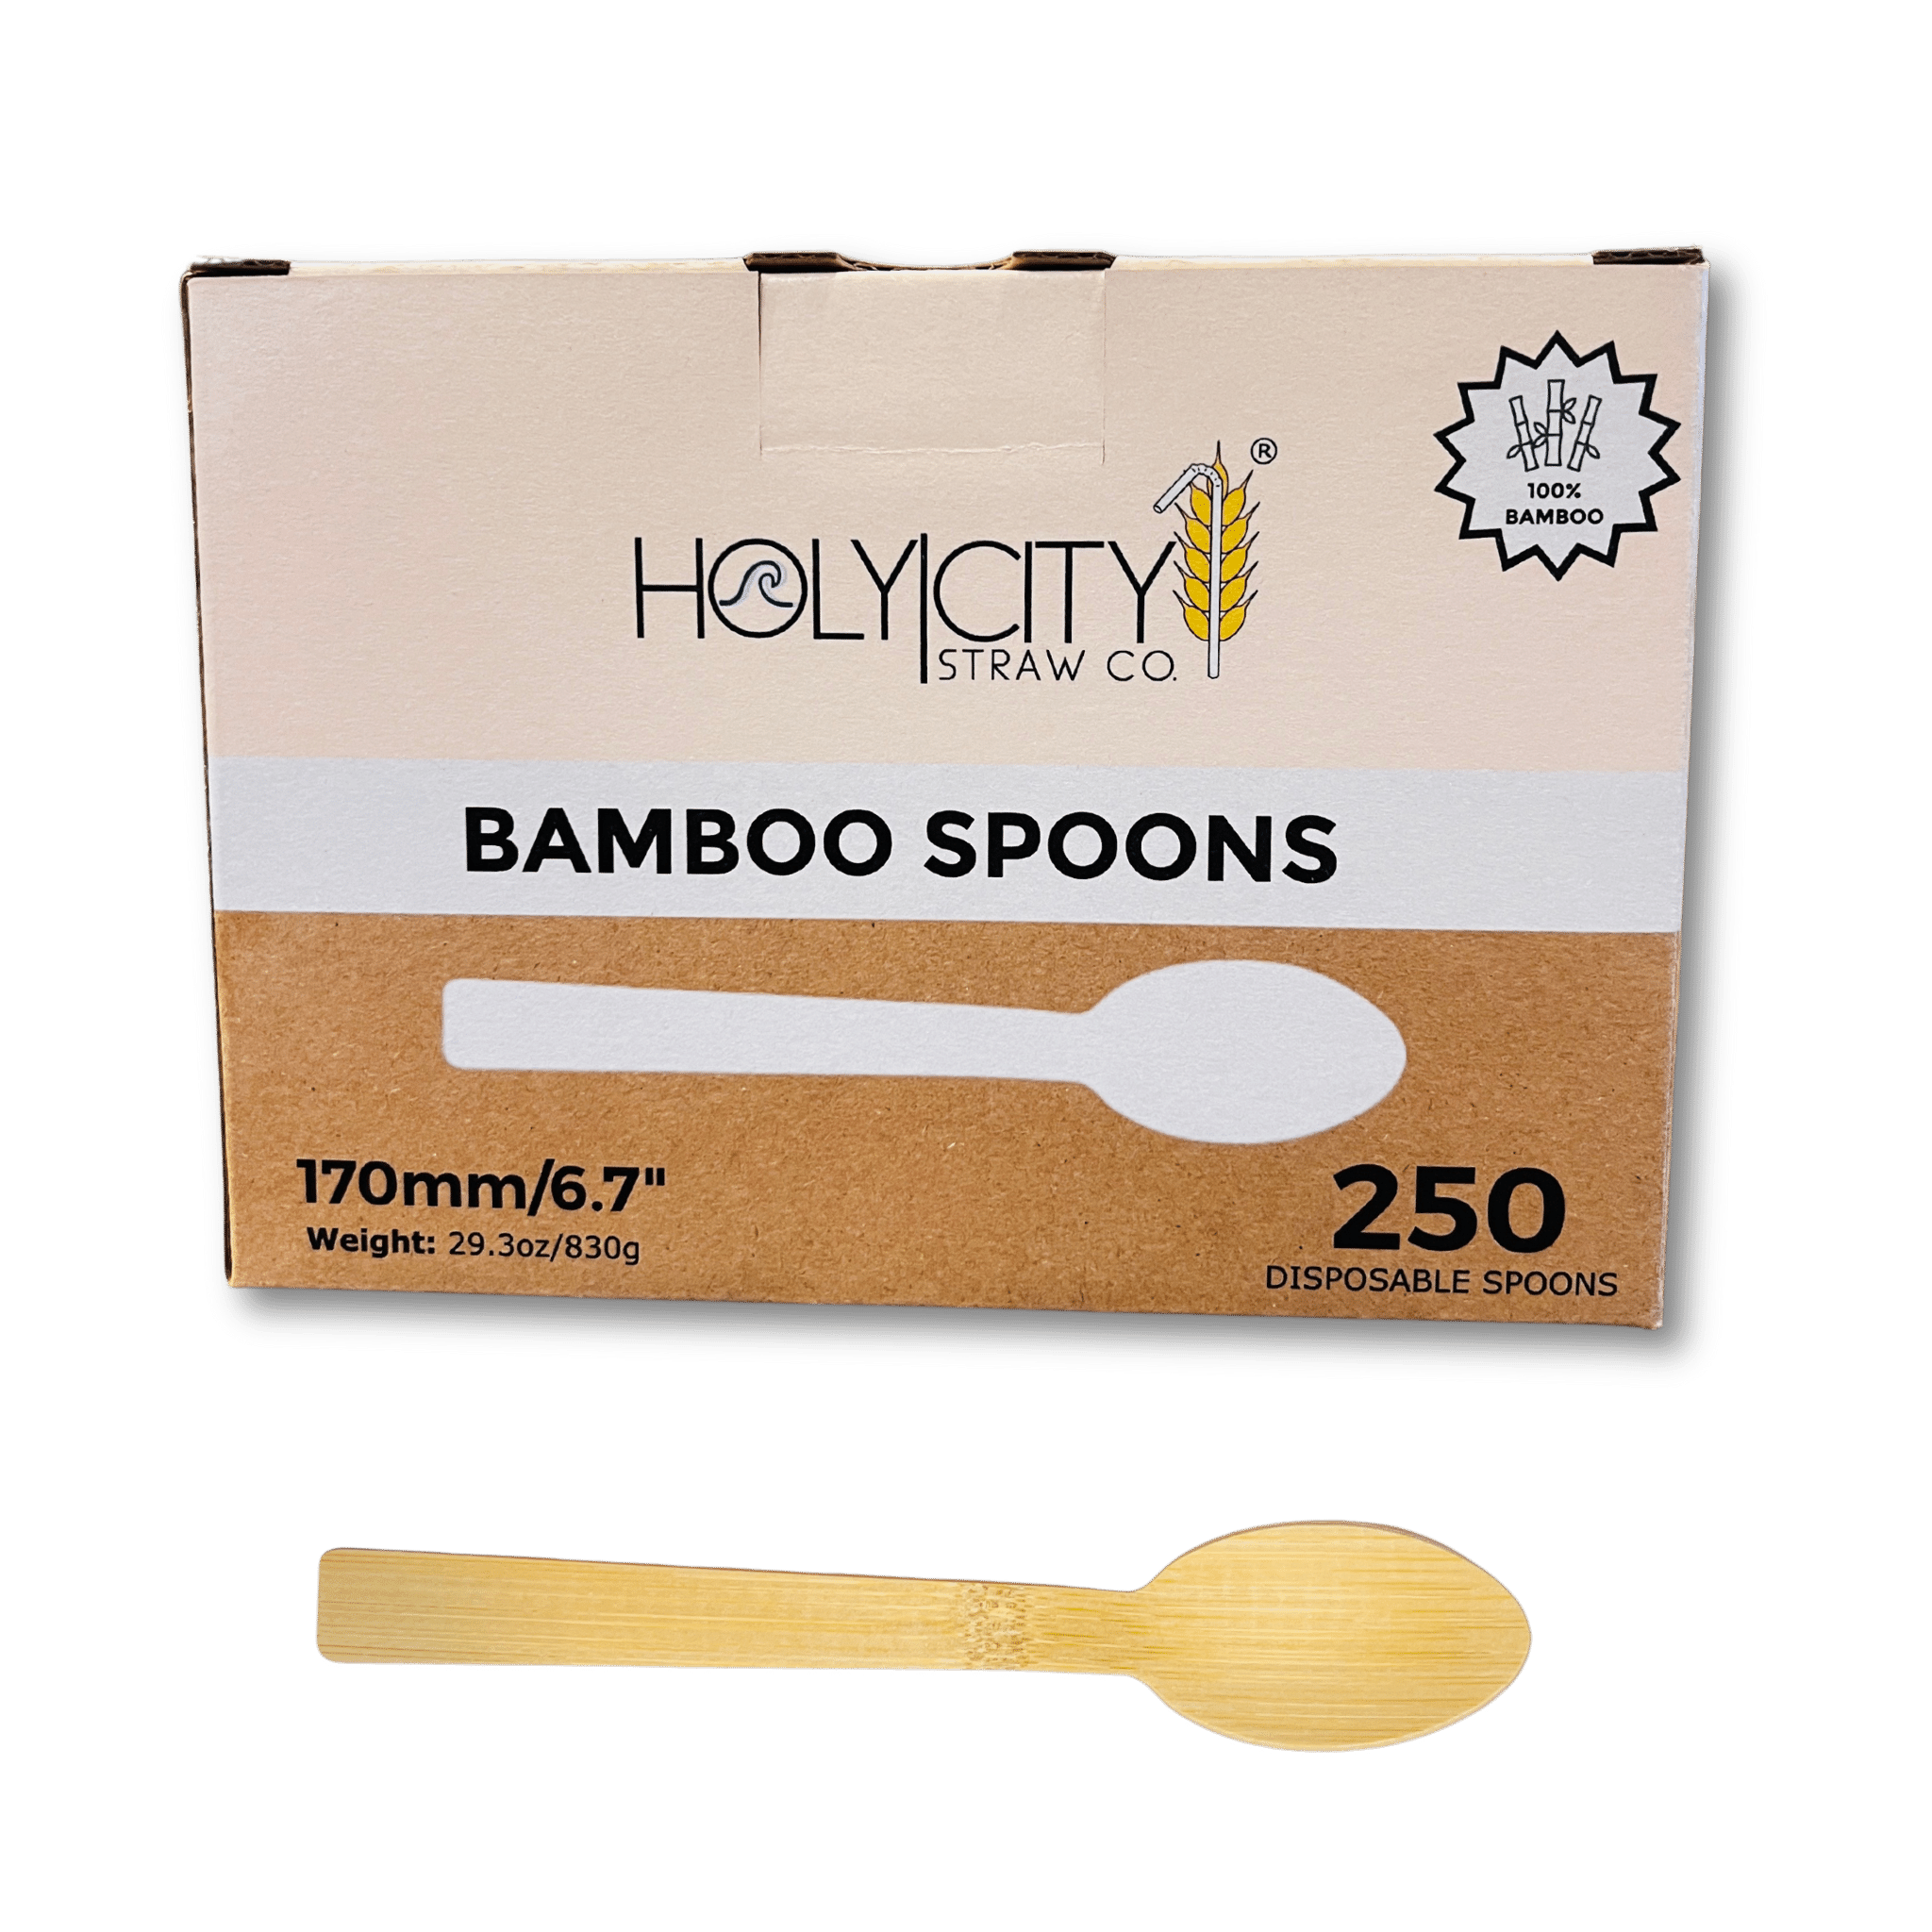 Box of Holy City Straw Company Bamboo Spoons 250 disposable spoons